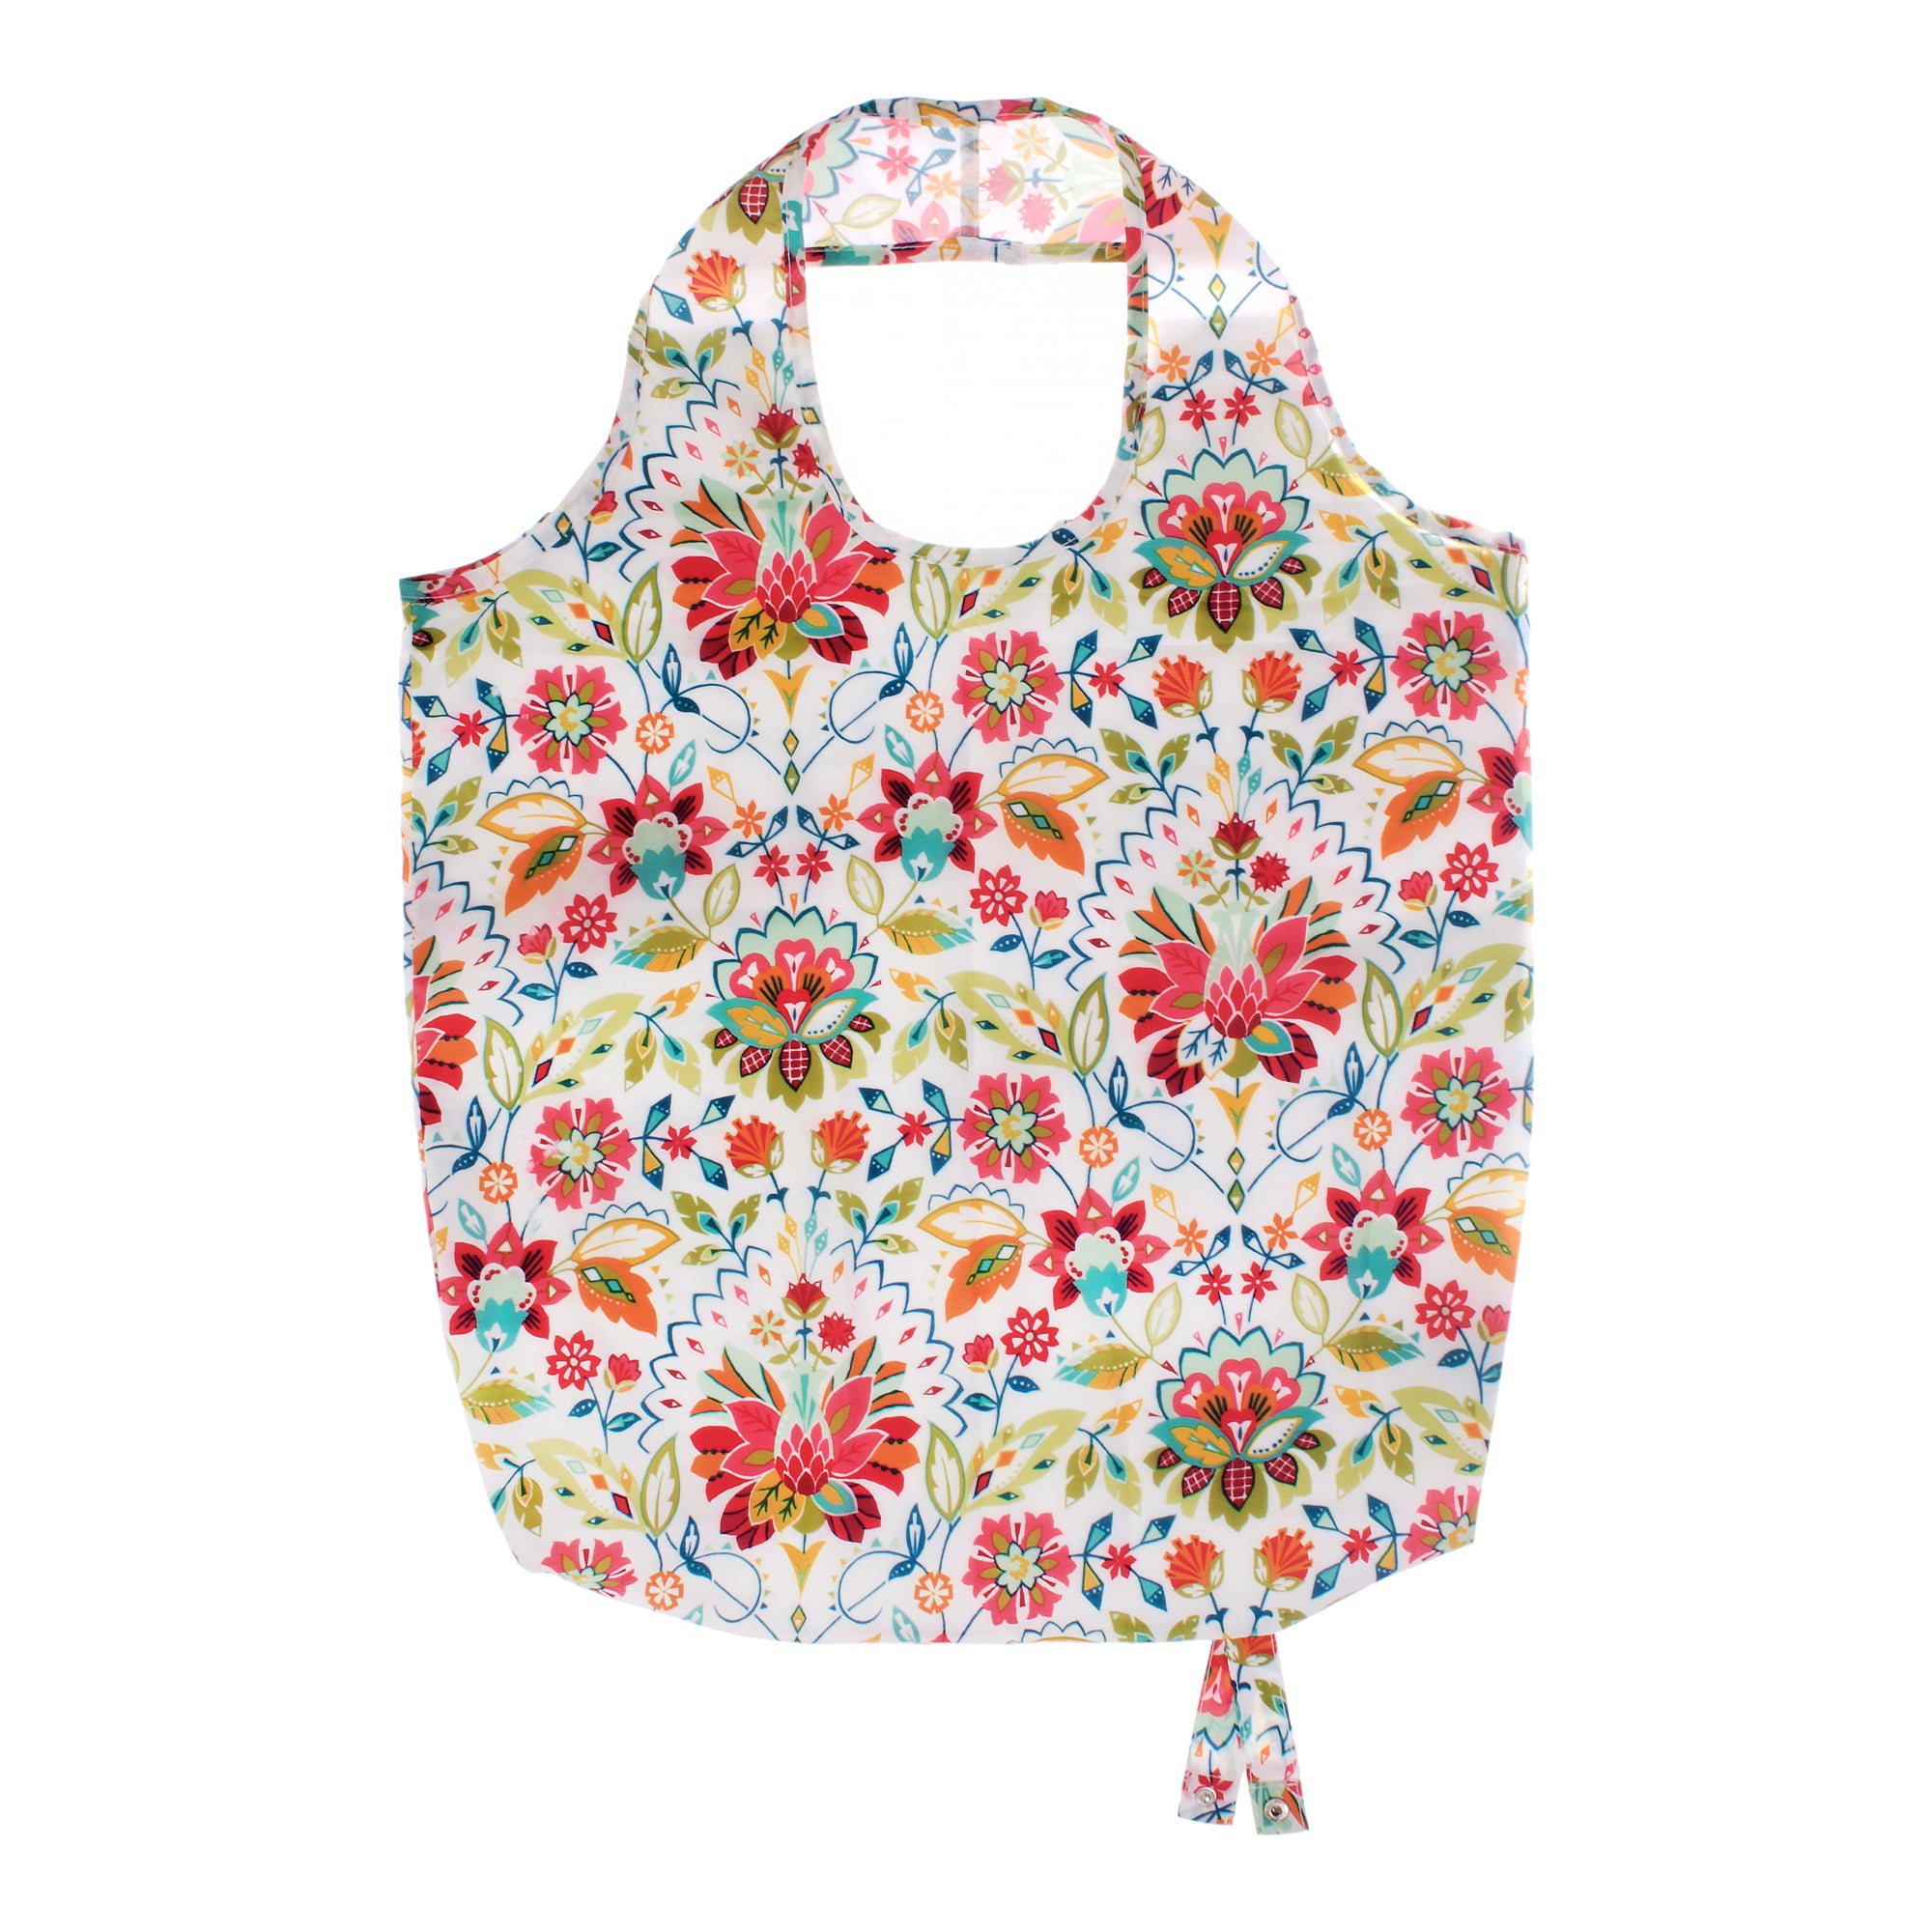 Ulster Weavers Bountiful Floral Polyester Reusable Shopping Bag